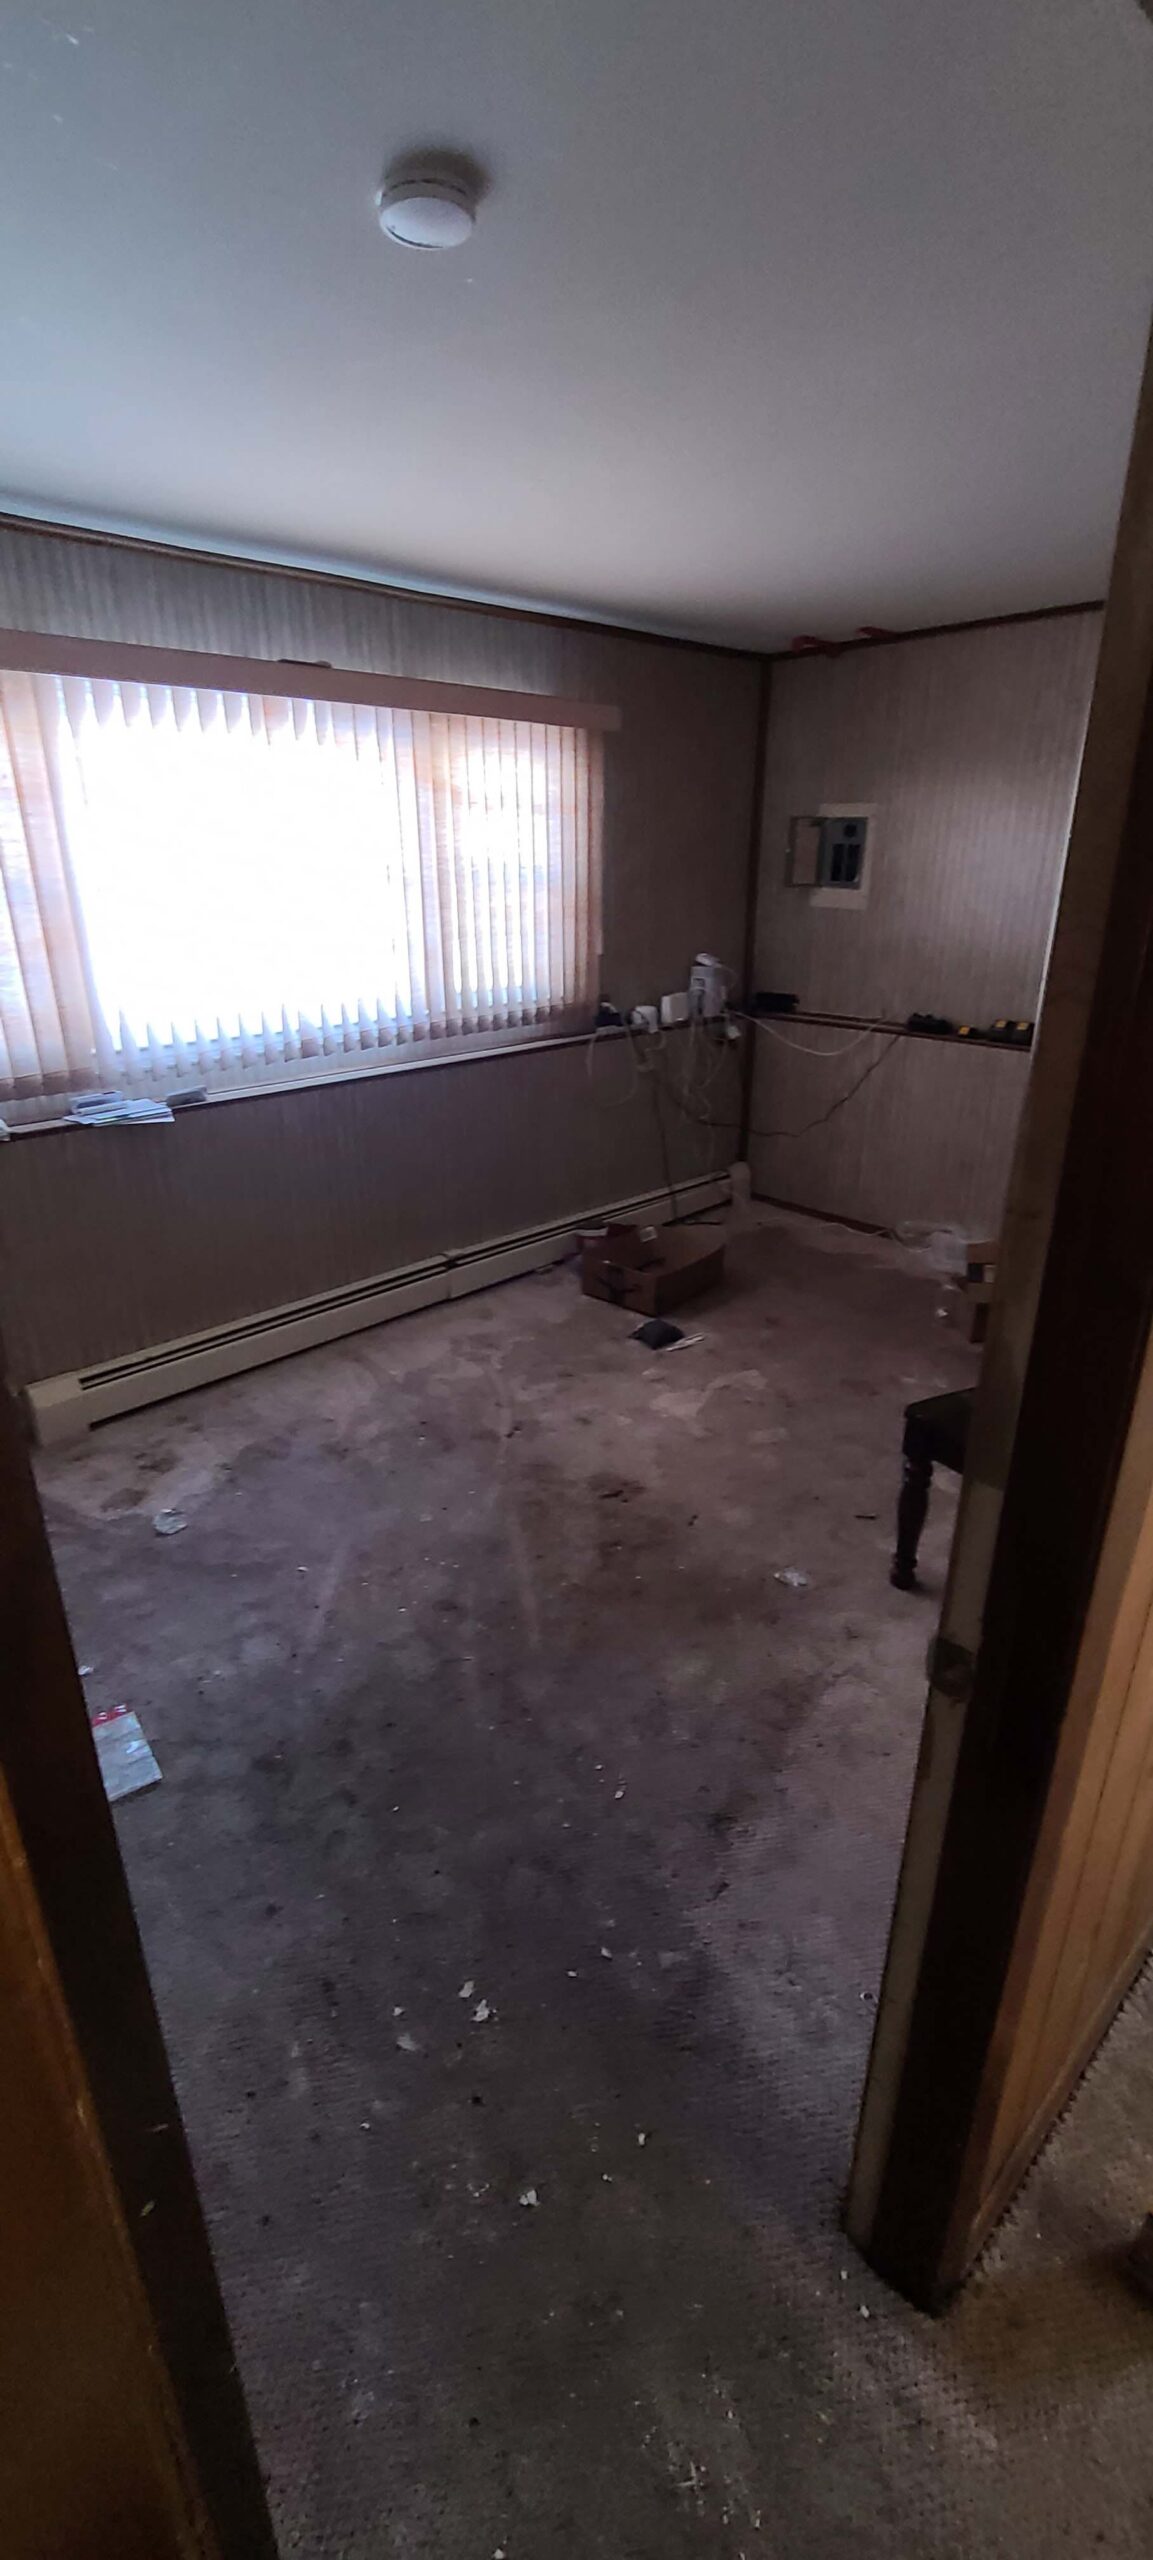 water damage clean up in west nyack